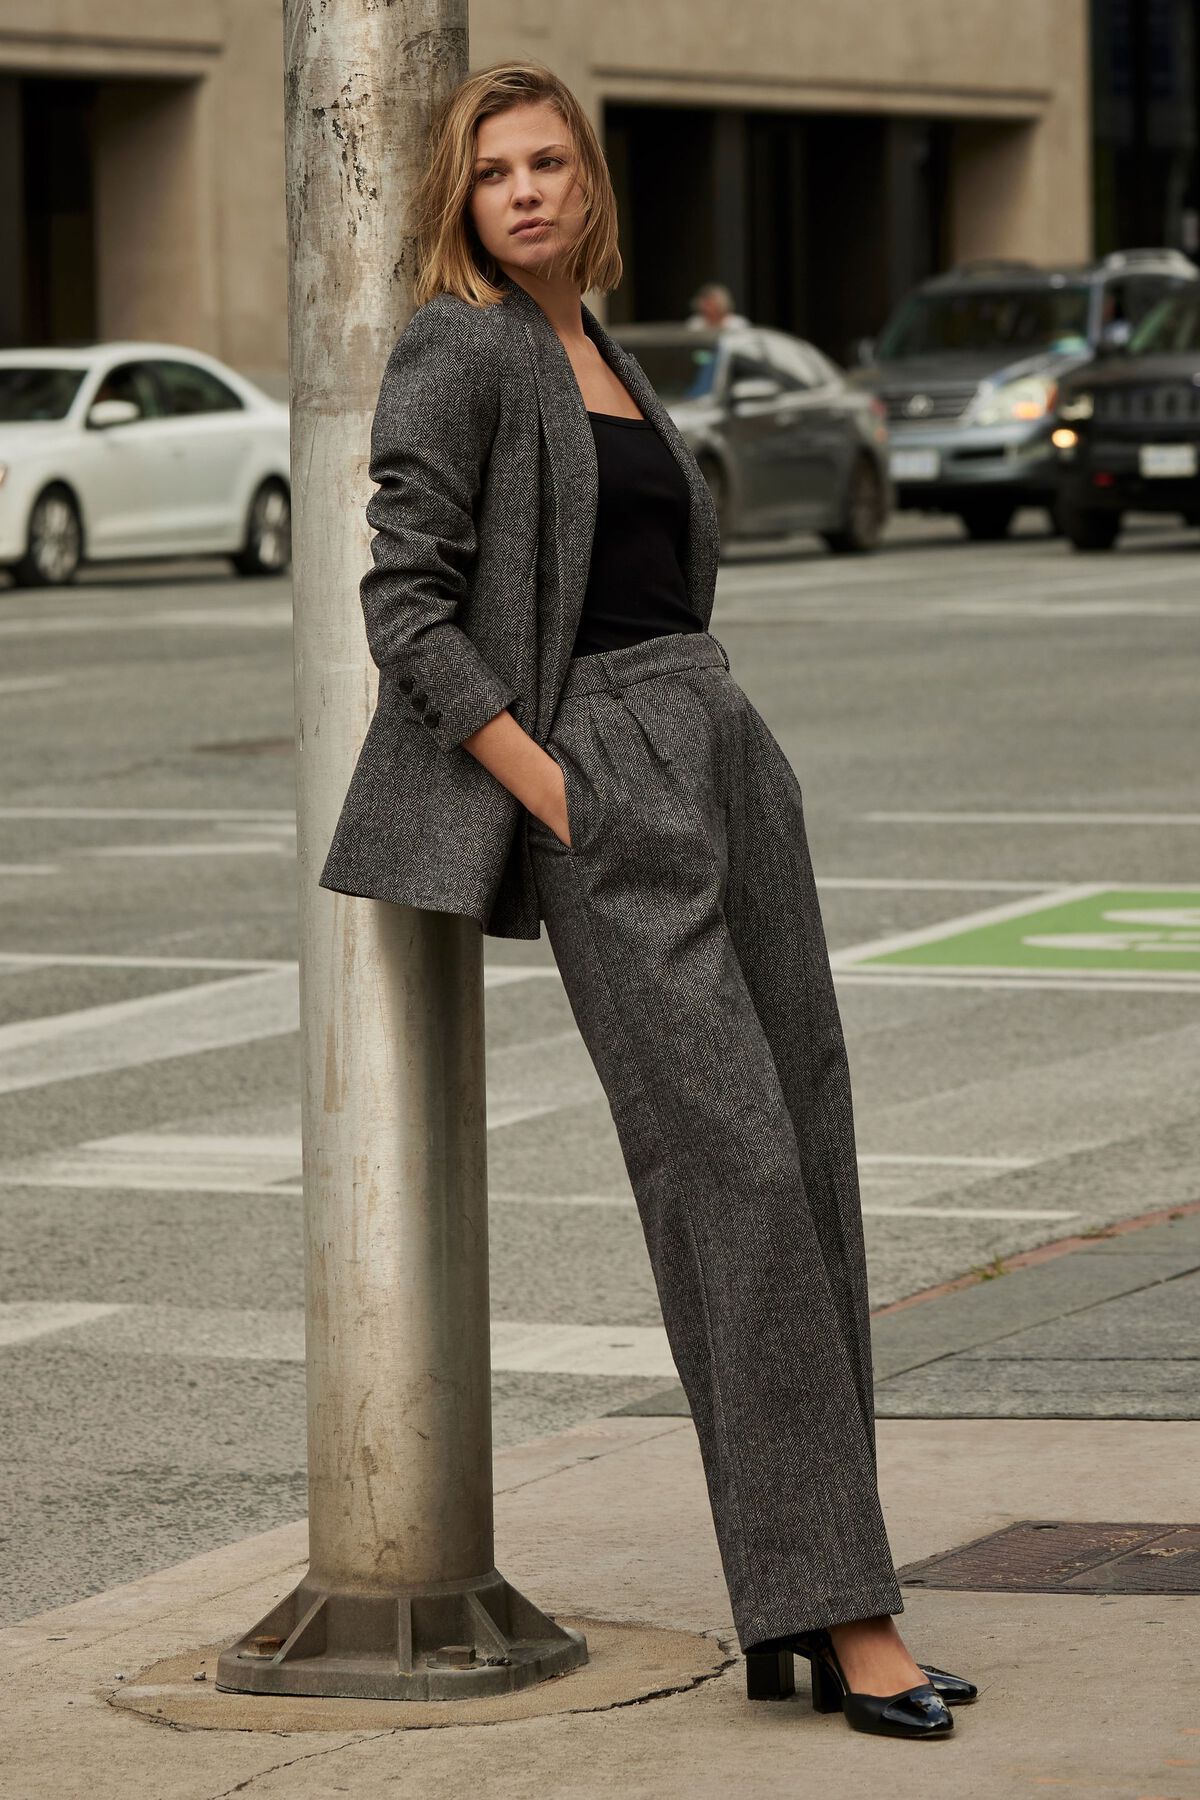 Wide-Fit Pleated Pants (Tall)